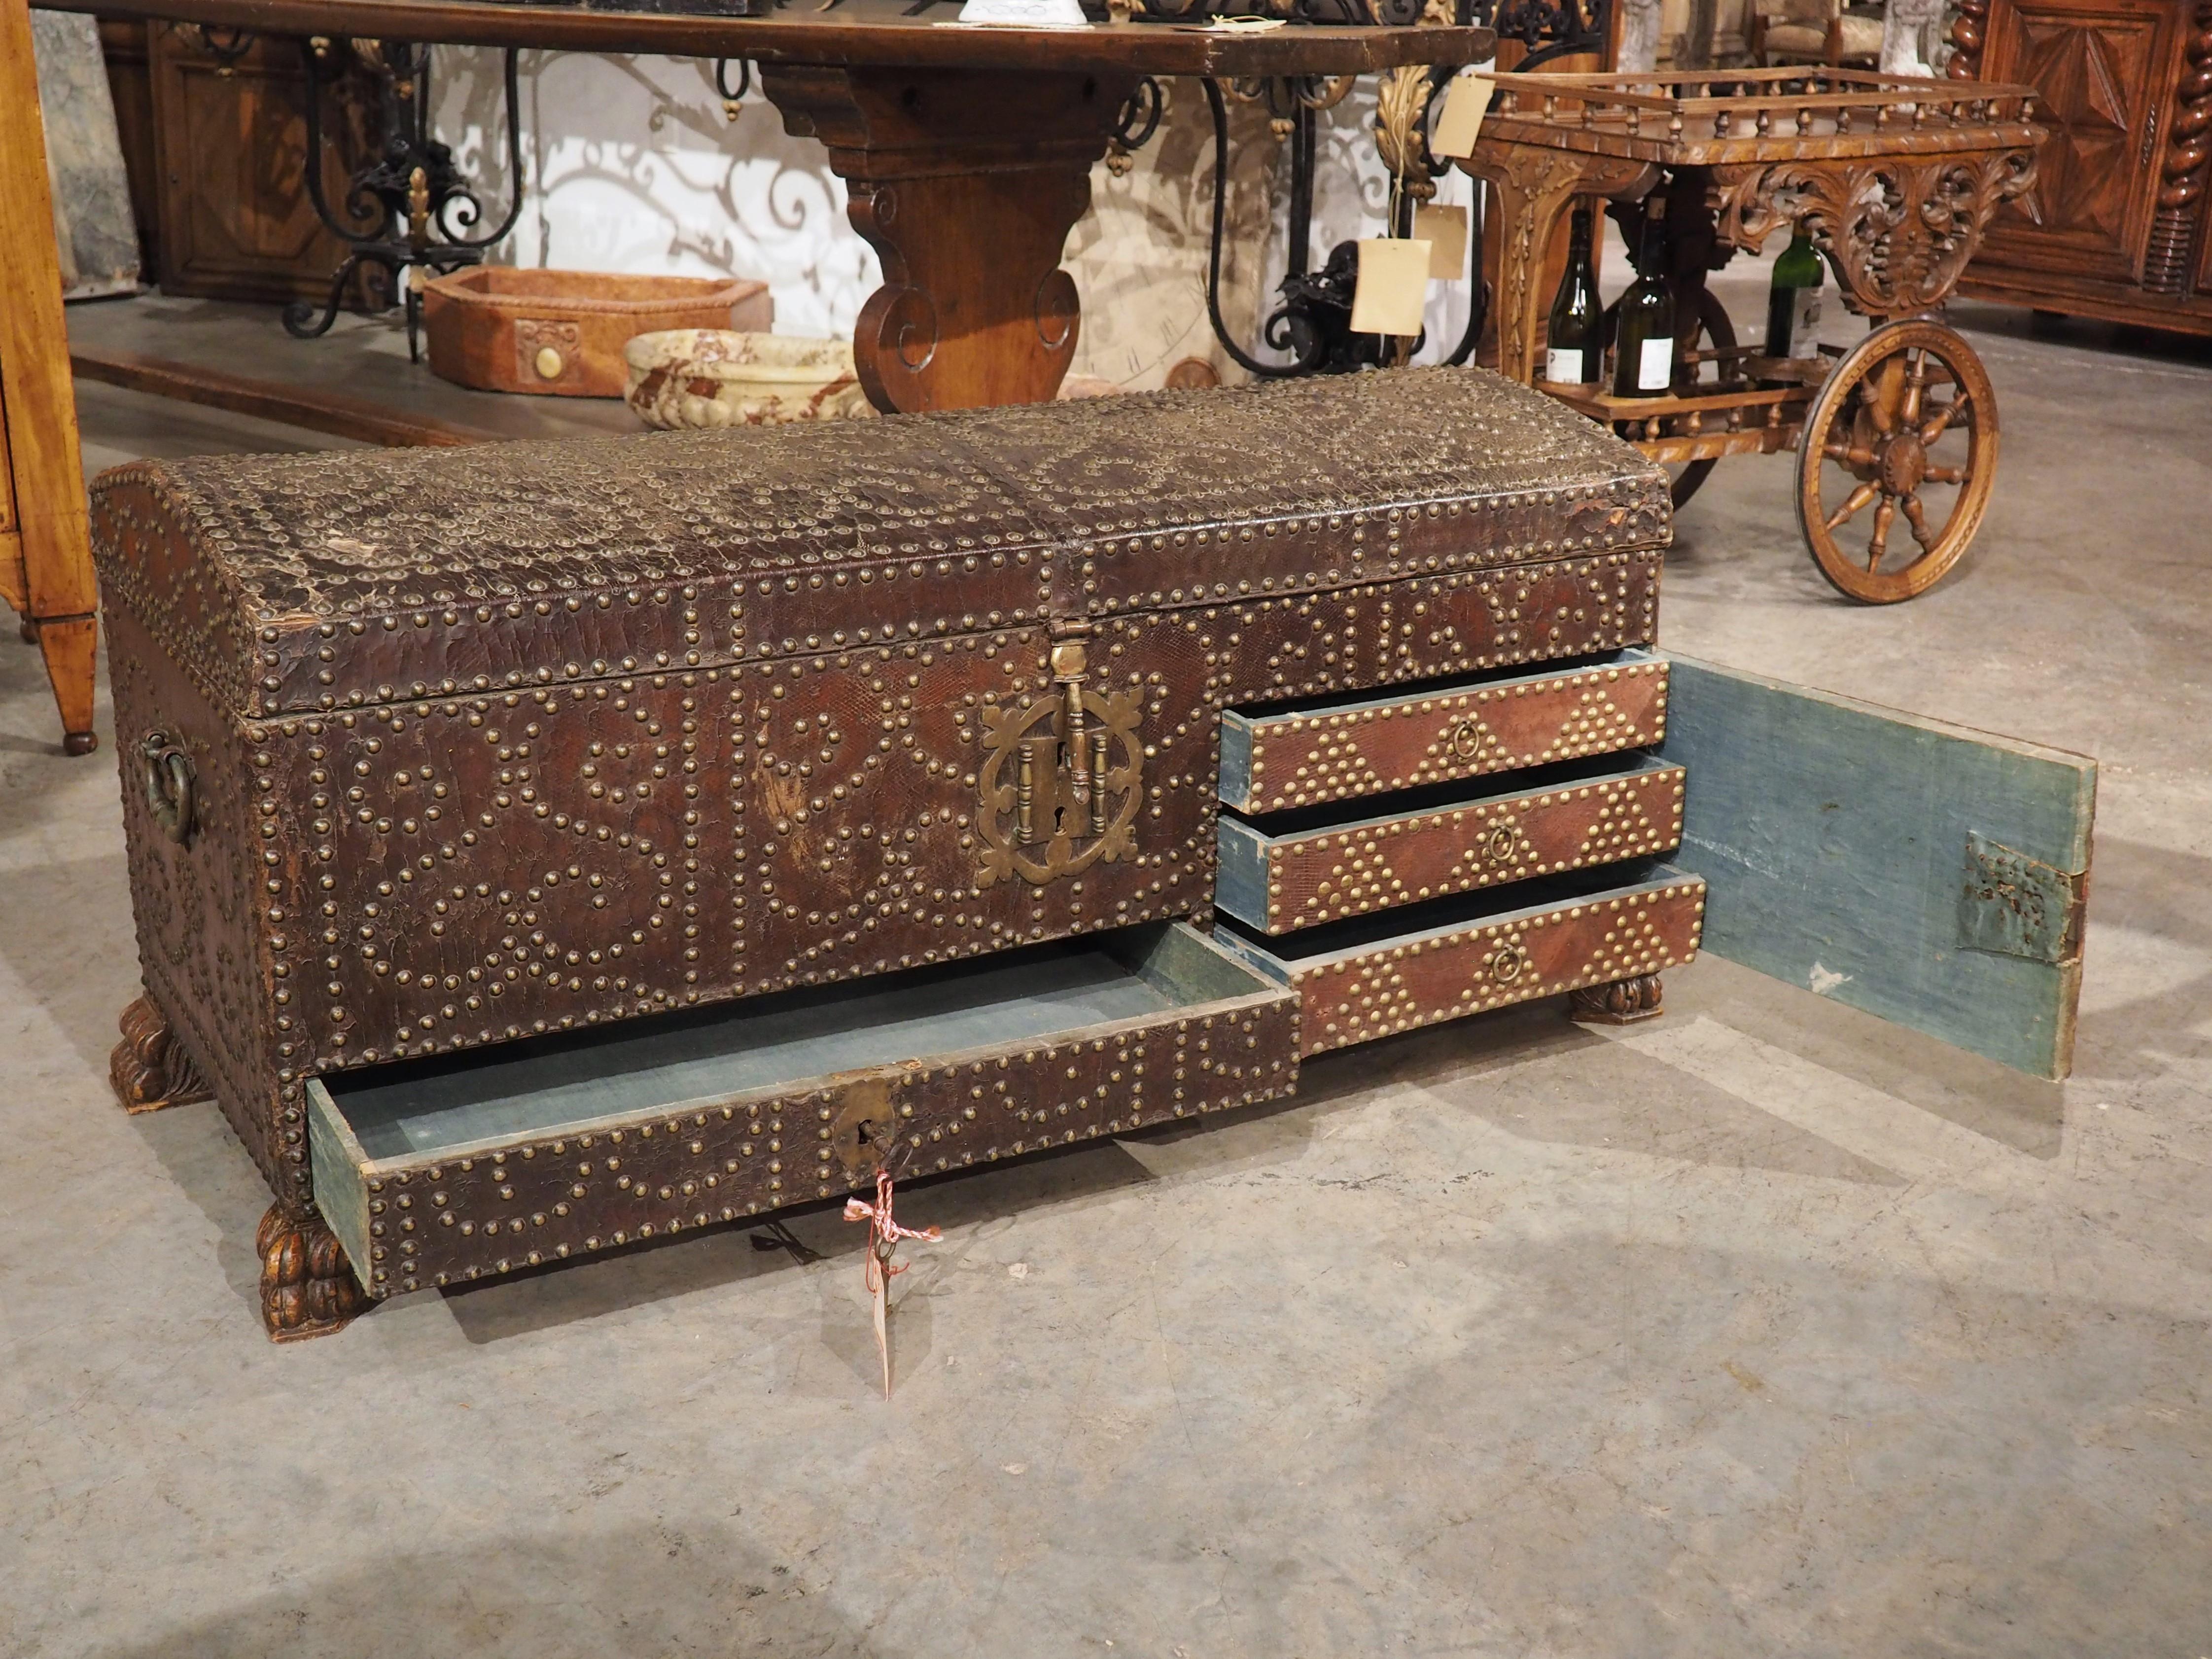 18th Century Spanish Studded Leather Trunk with Lockable Compartments For Sale 13